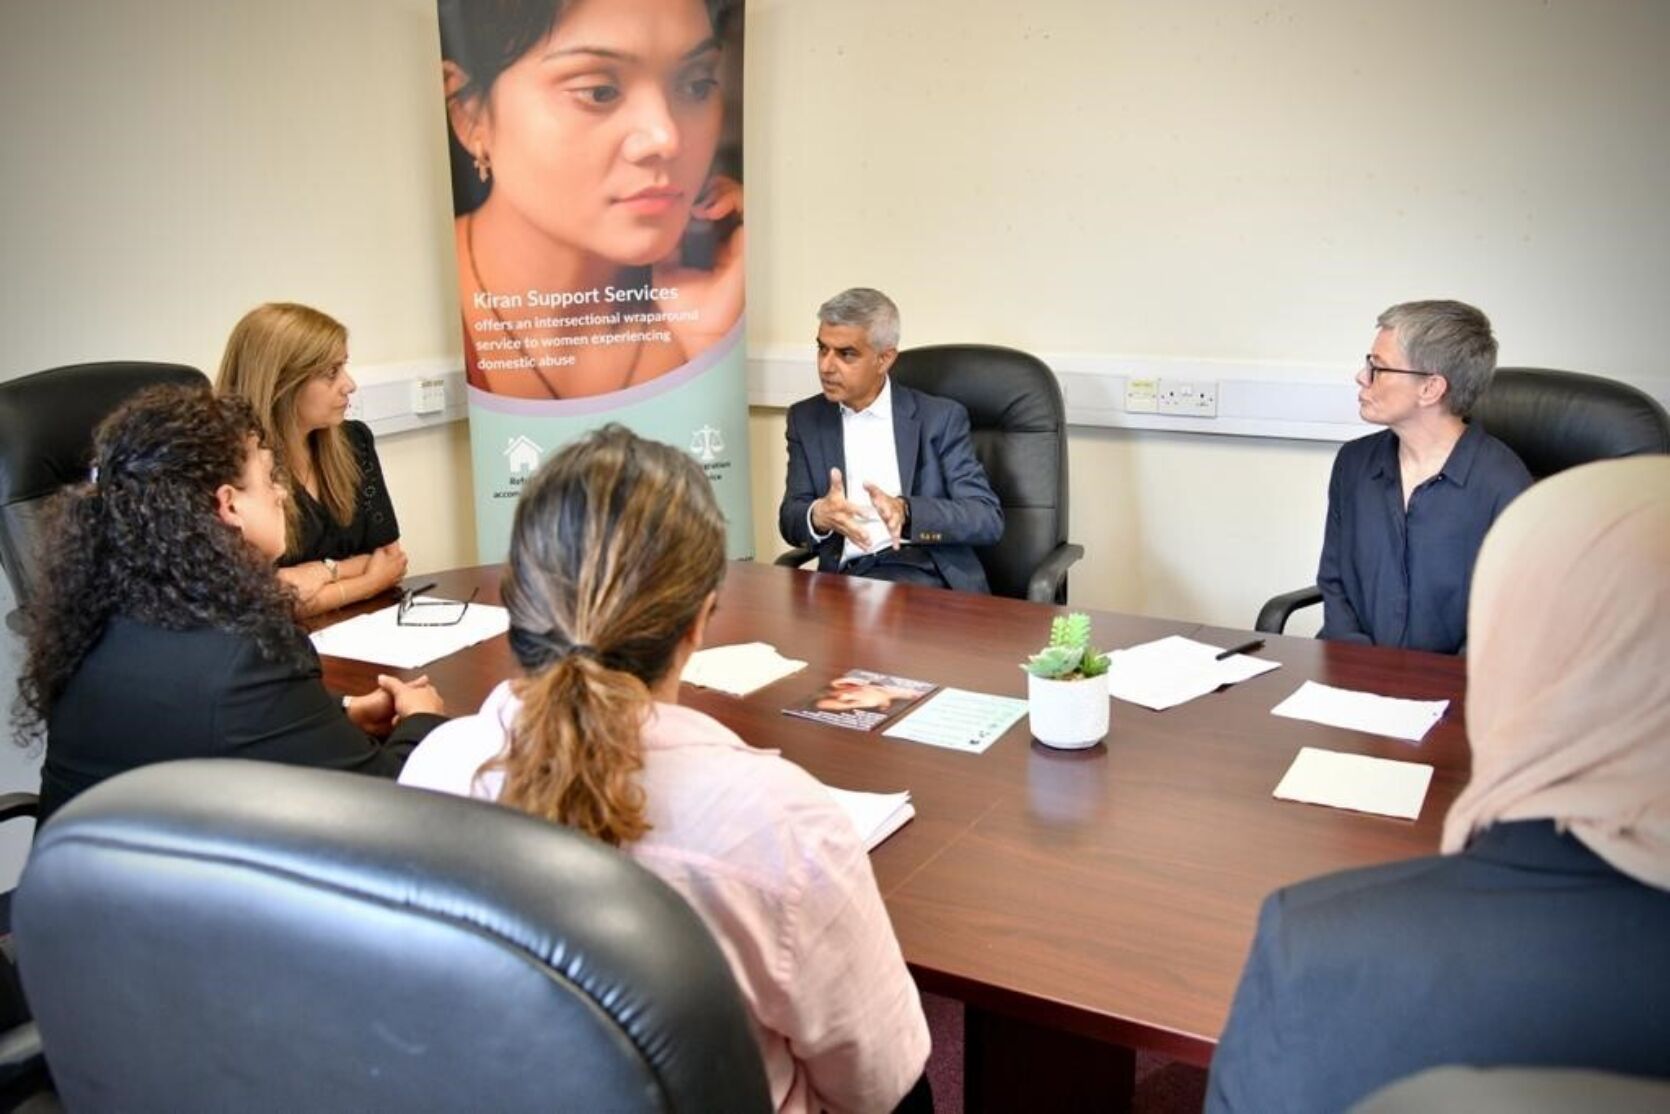 Members of the team from Kiran Support Services sitting around a boardroom table with the Mayor of London, Sadiq Khan, and The London Community Foundation CEO Kate Markey. In the background is a pull-up banner with a woman's face on it.